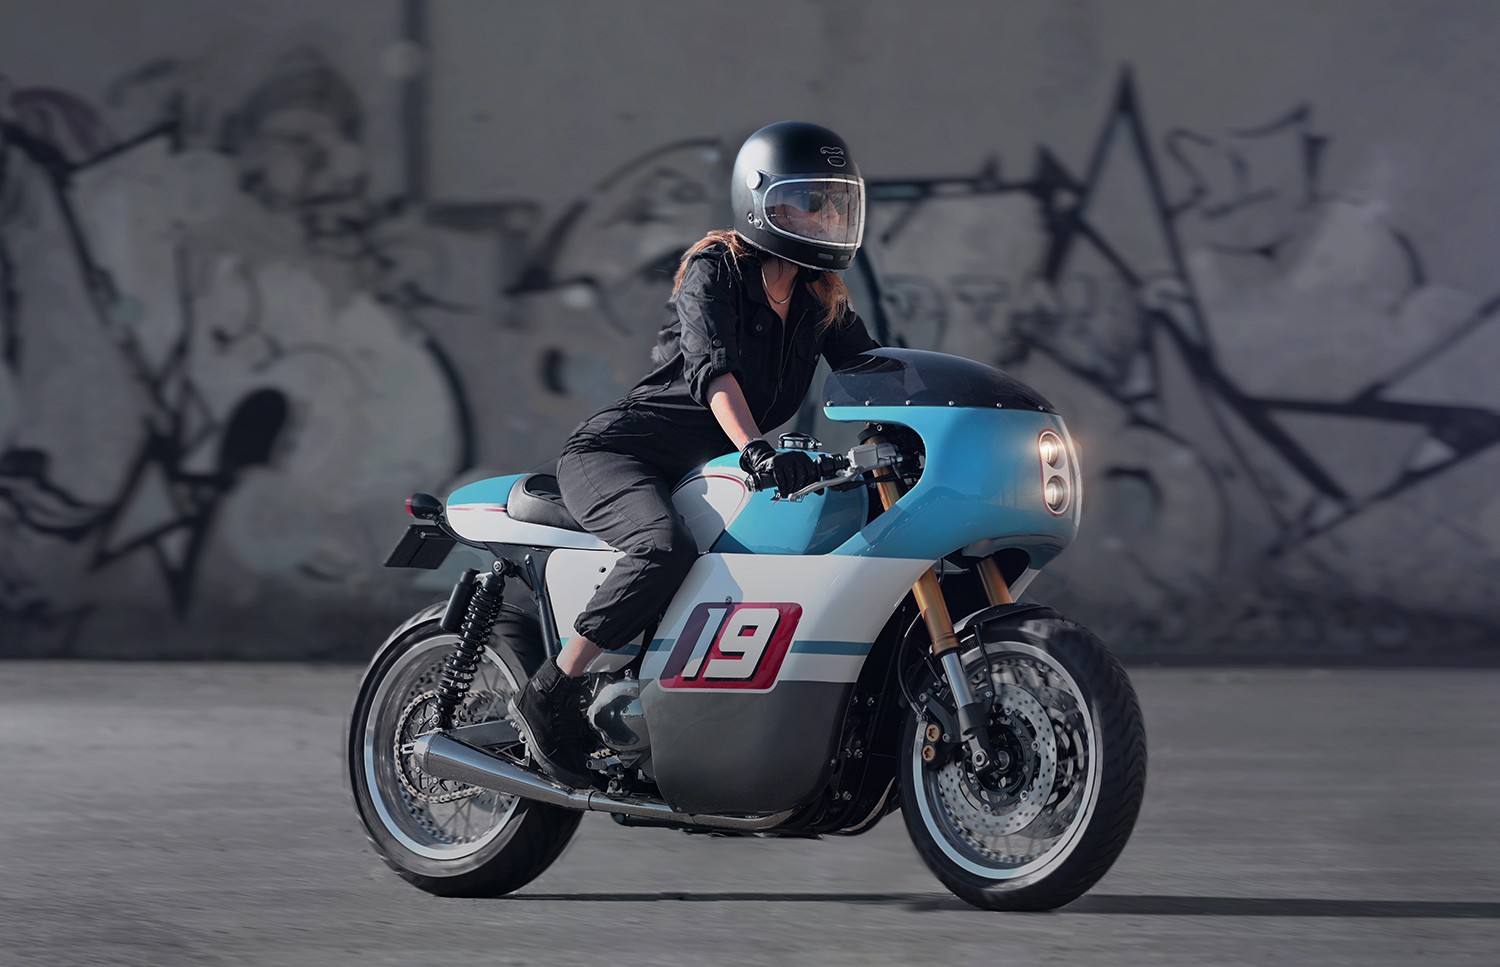 triumph thruxton lithium keeps things old school looks ready to hit the racetrack 3